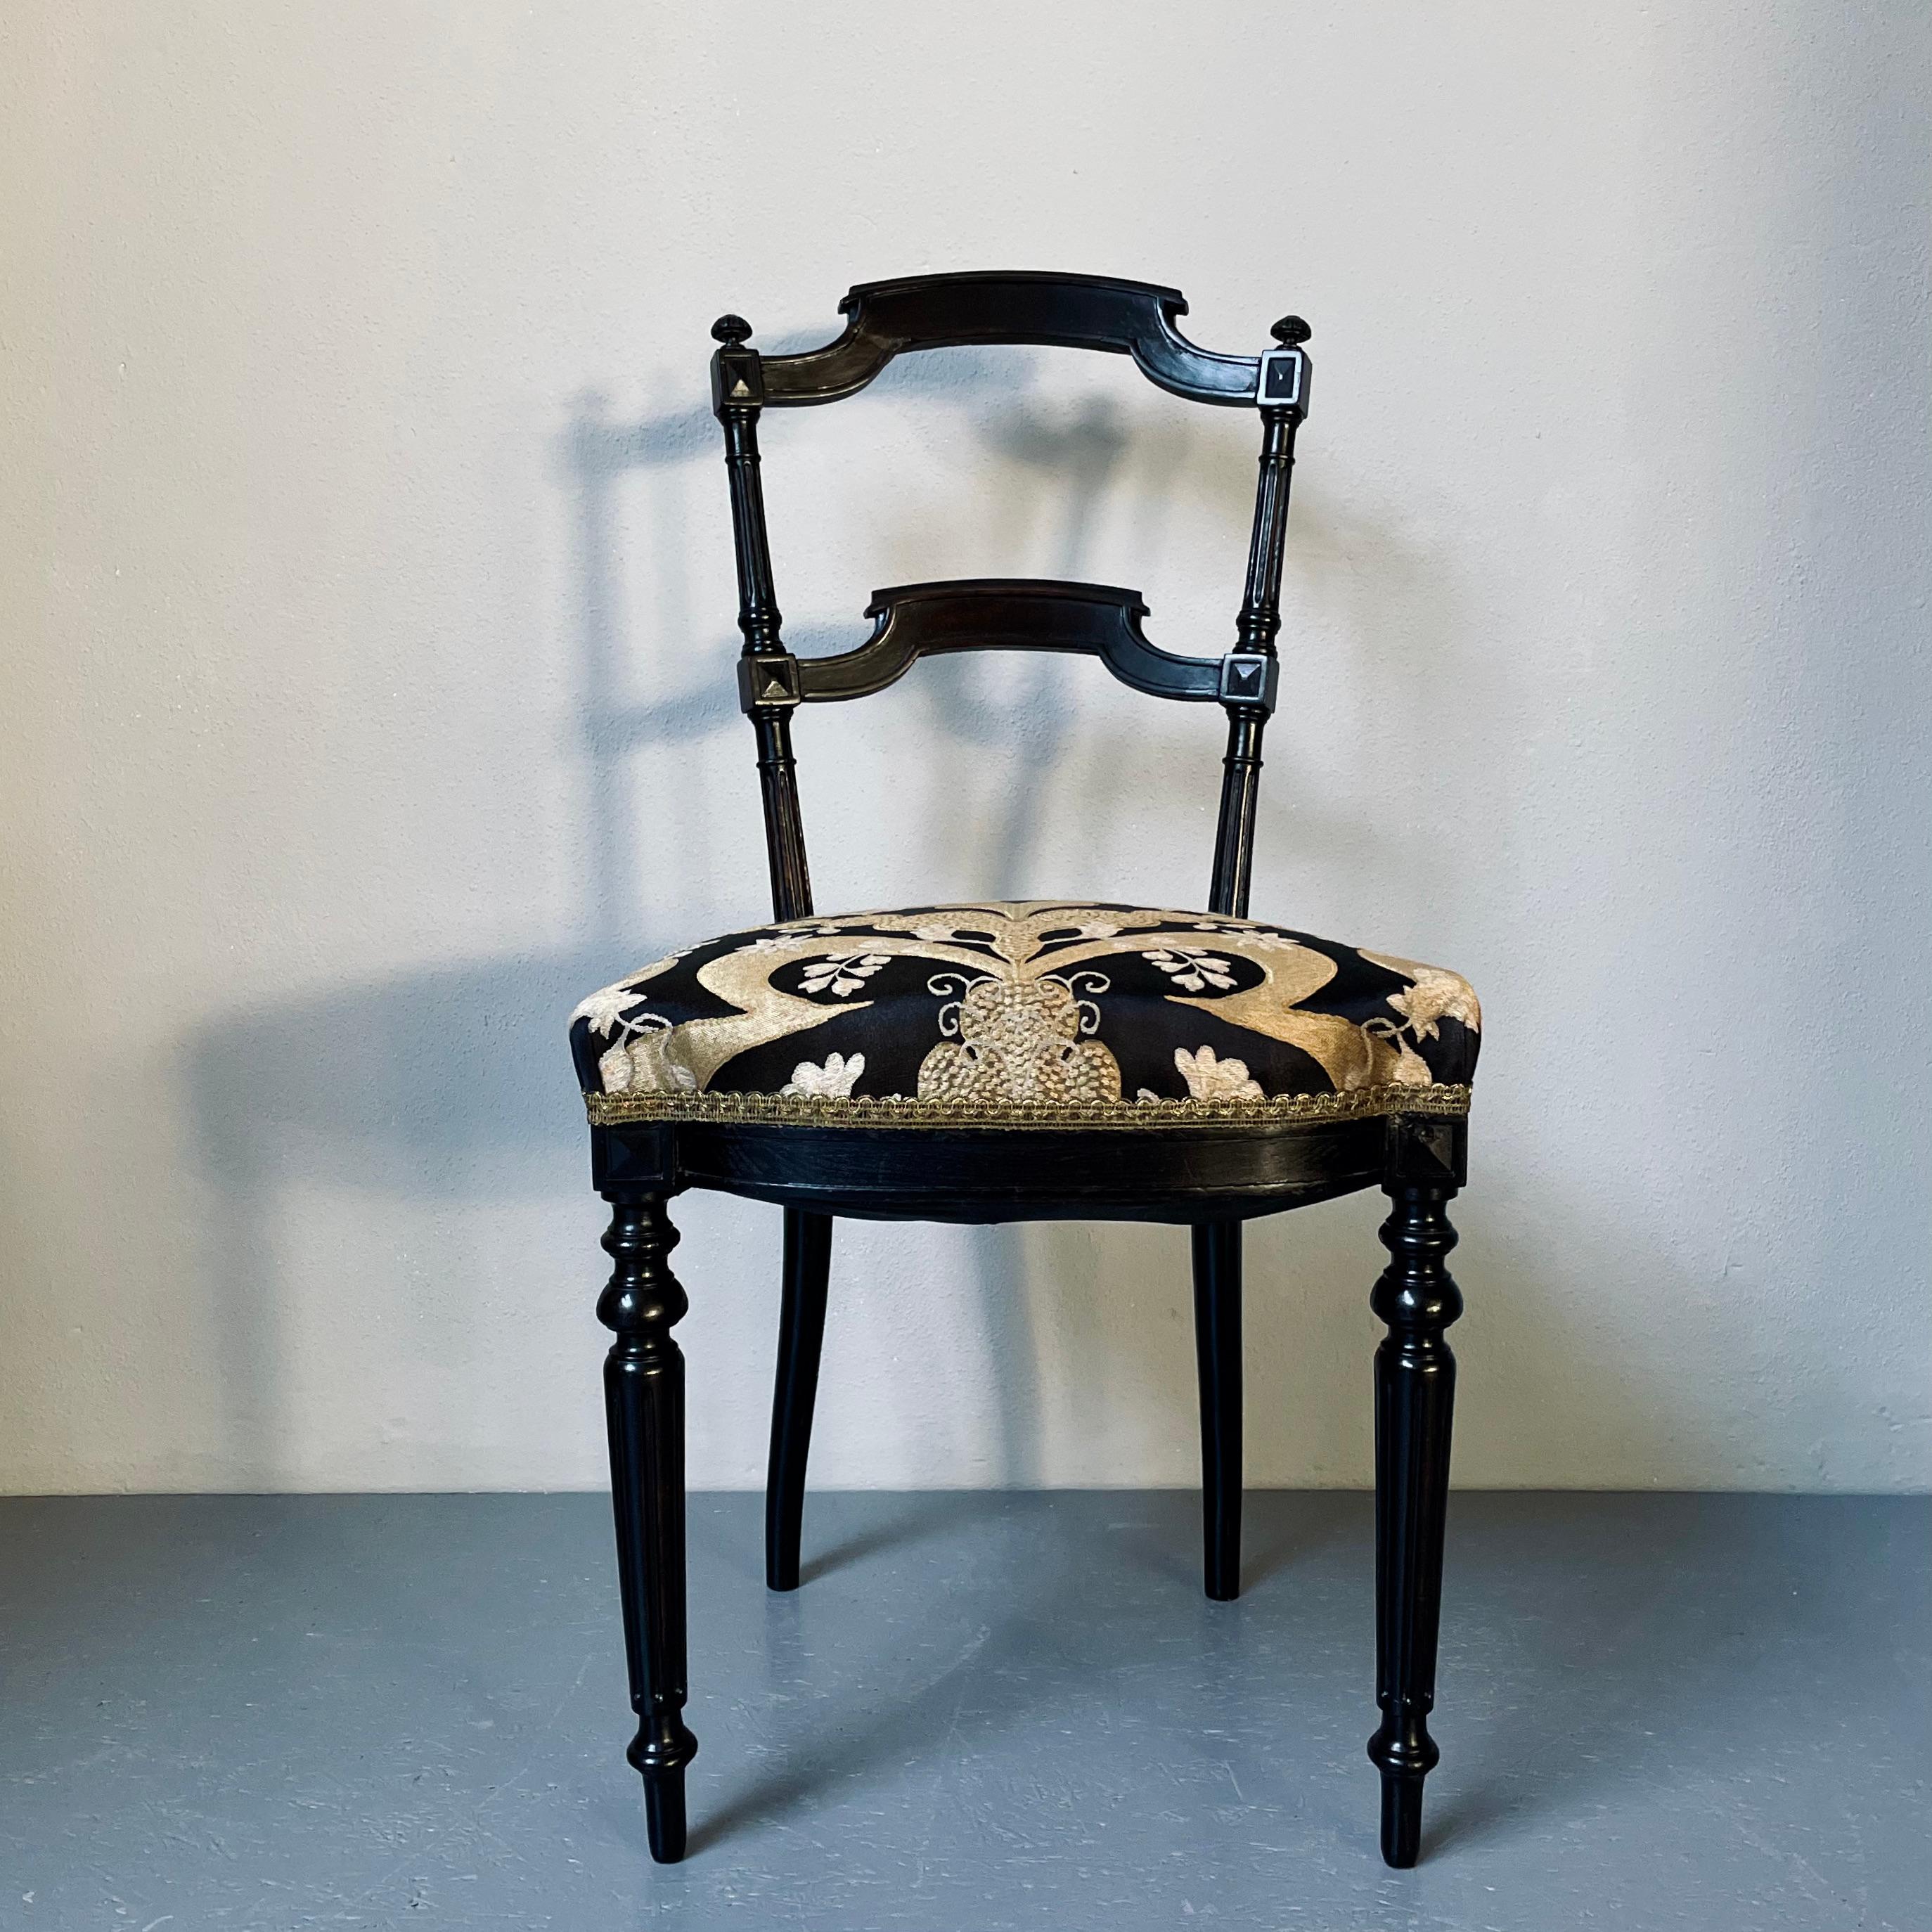 This 19th Century French parlor chair has been restored and given a beautiful ornamental fabric. Its seat is firm and comfortable.